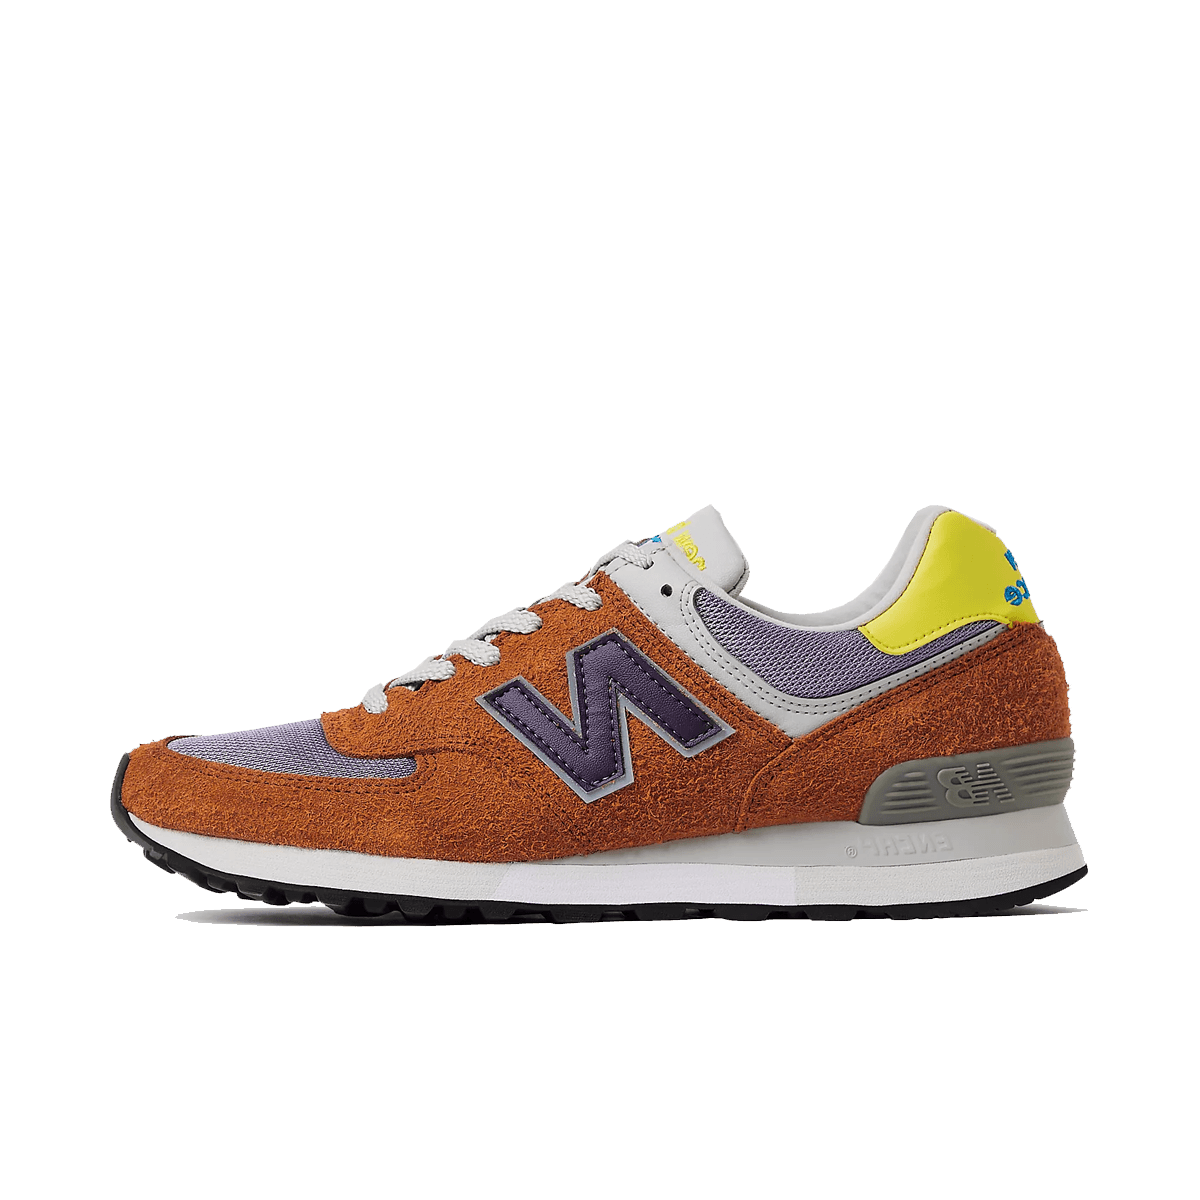 New Balance 576 'Apricot' - Made in UK